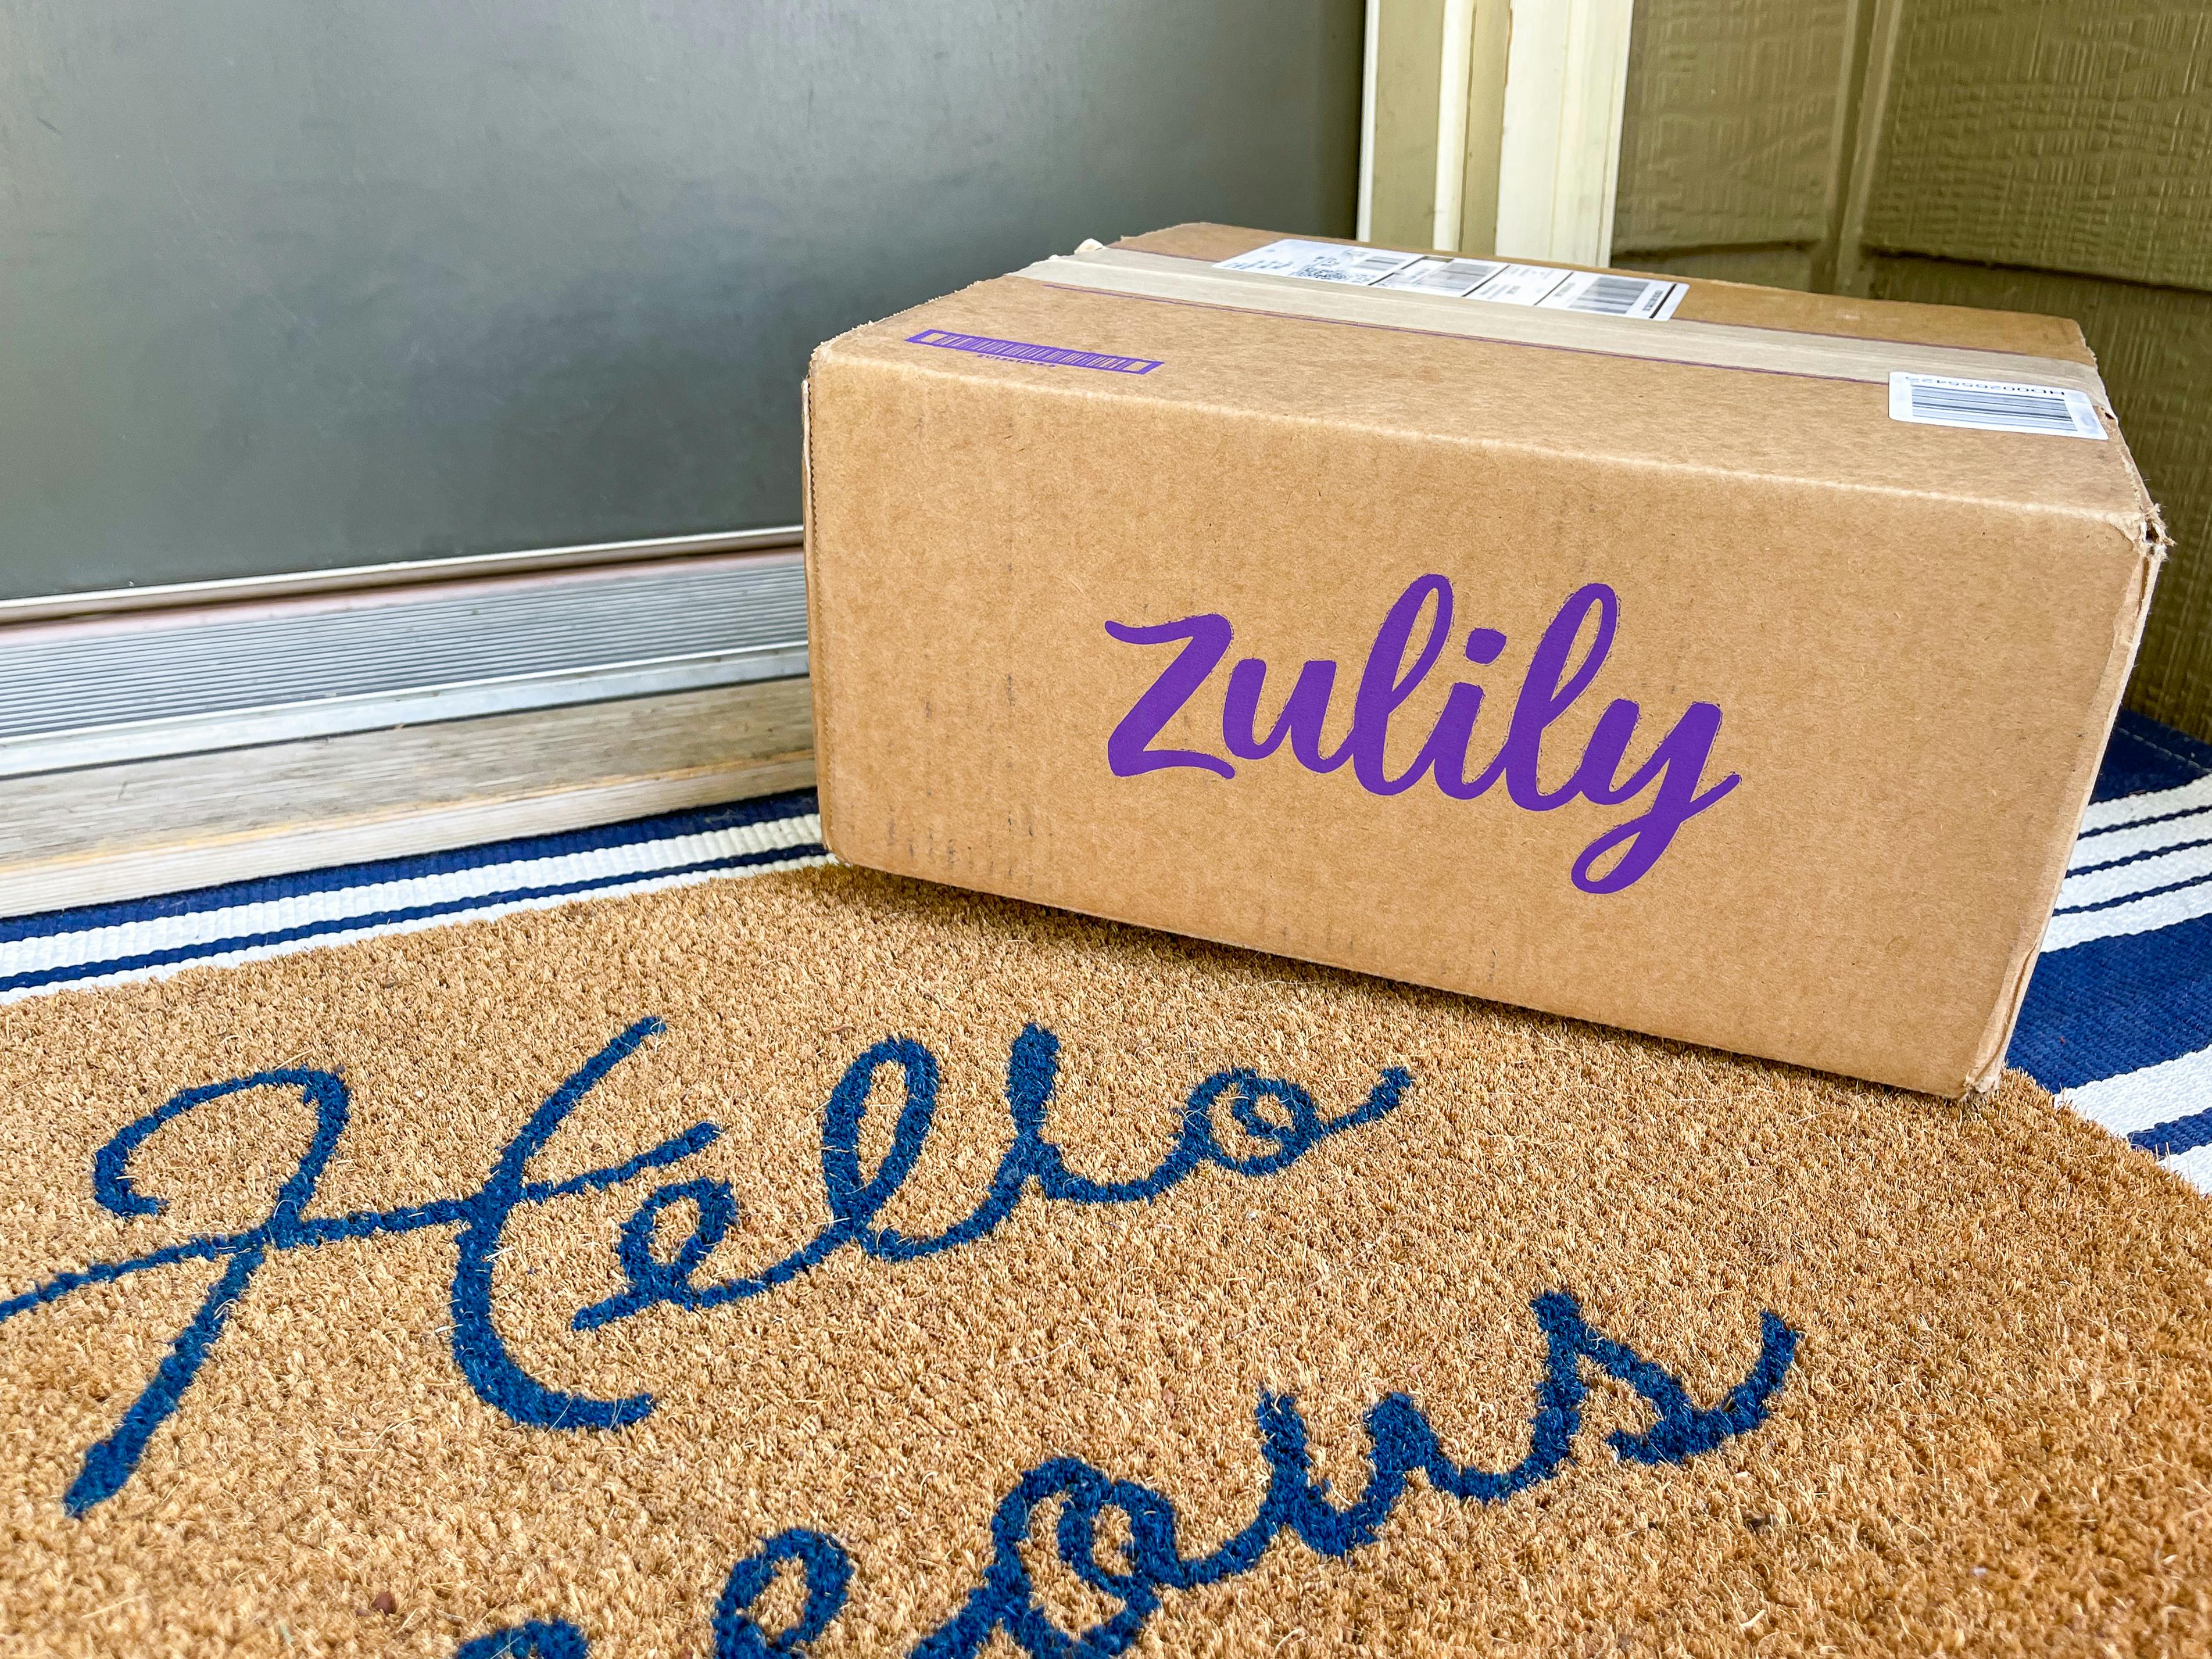 A Zulily box sitting on a front porch in front of someone's front door.